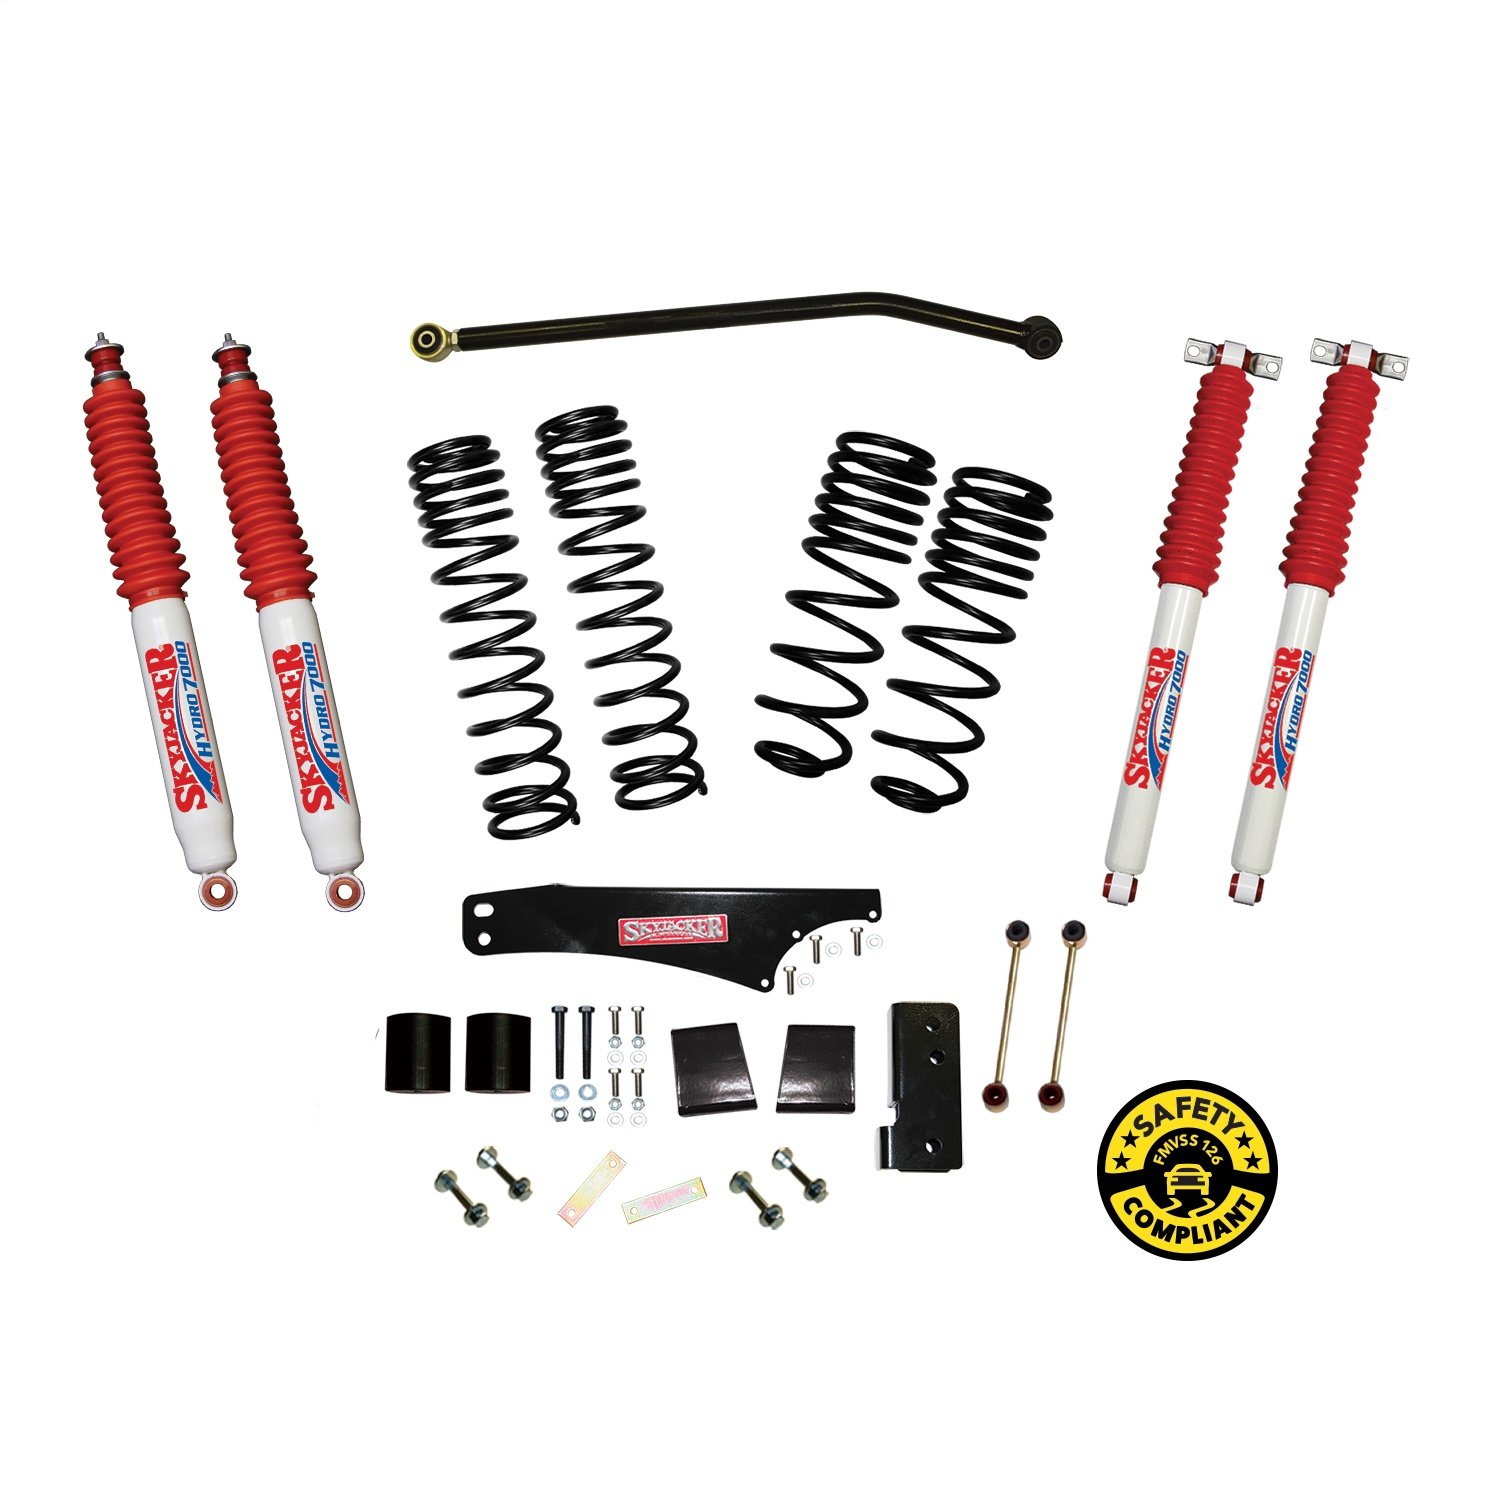 JK35BPHLT Front and Rear Suspension Lift Kit, Lift Amount: 4 in. Front/4 in. Rear